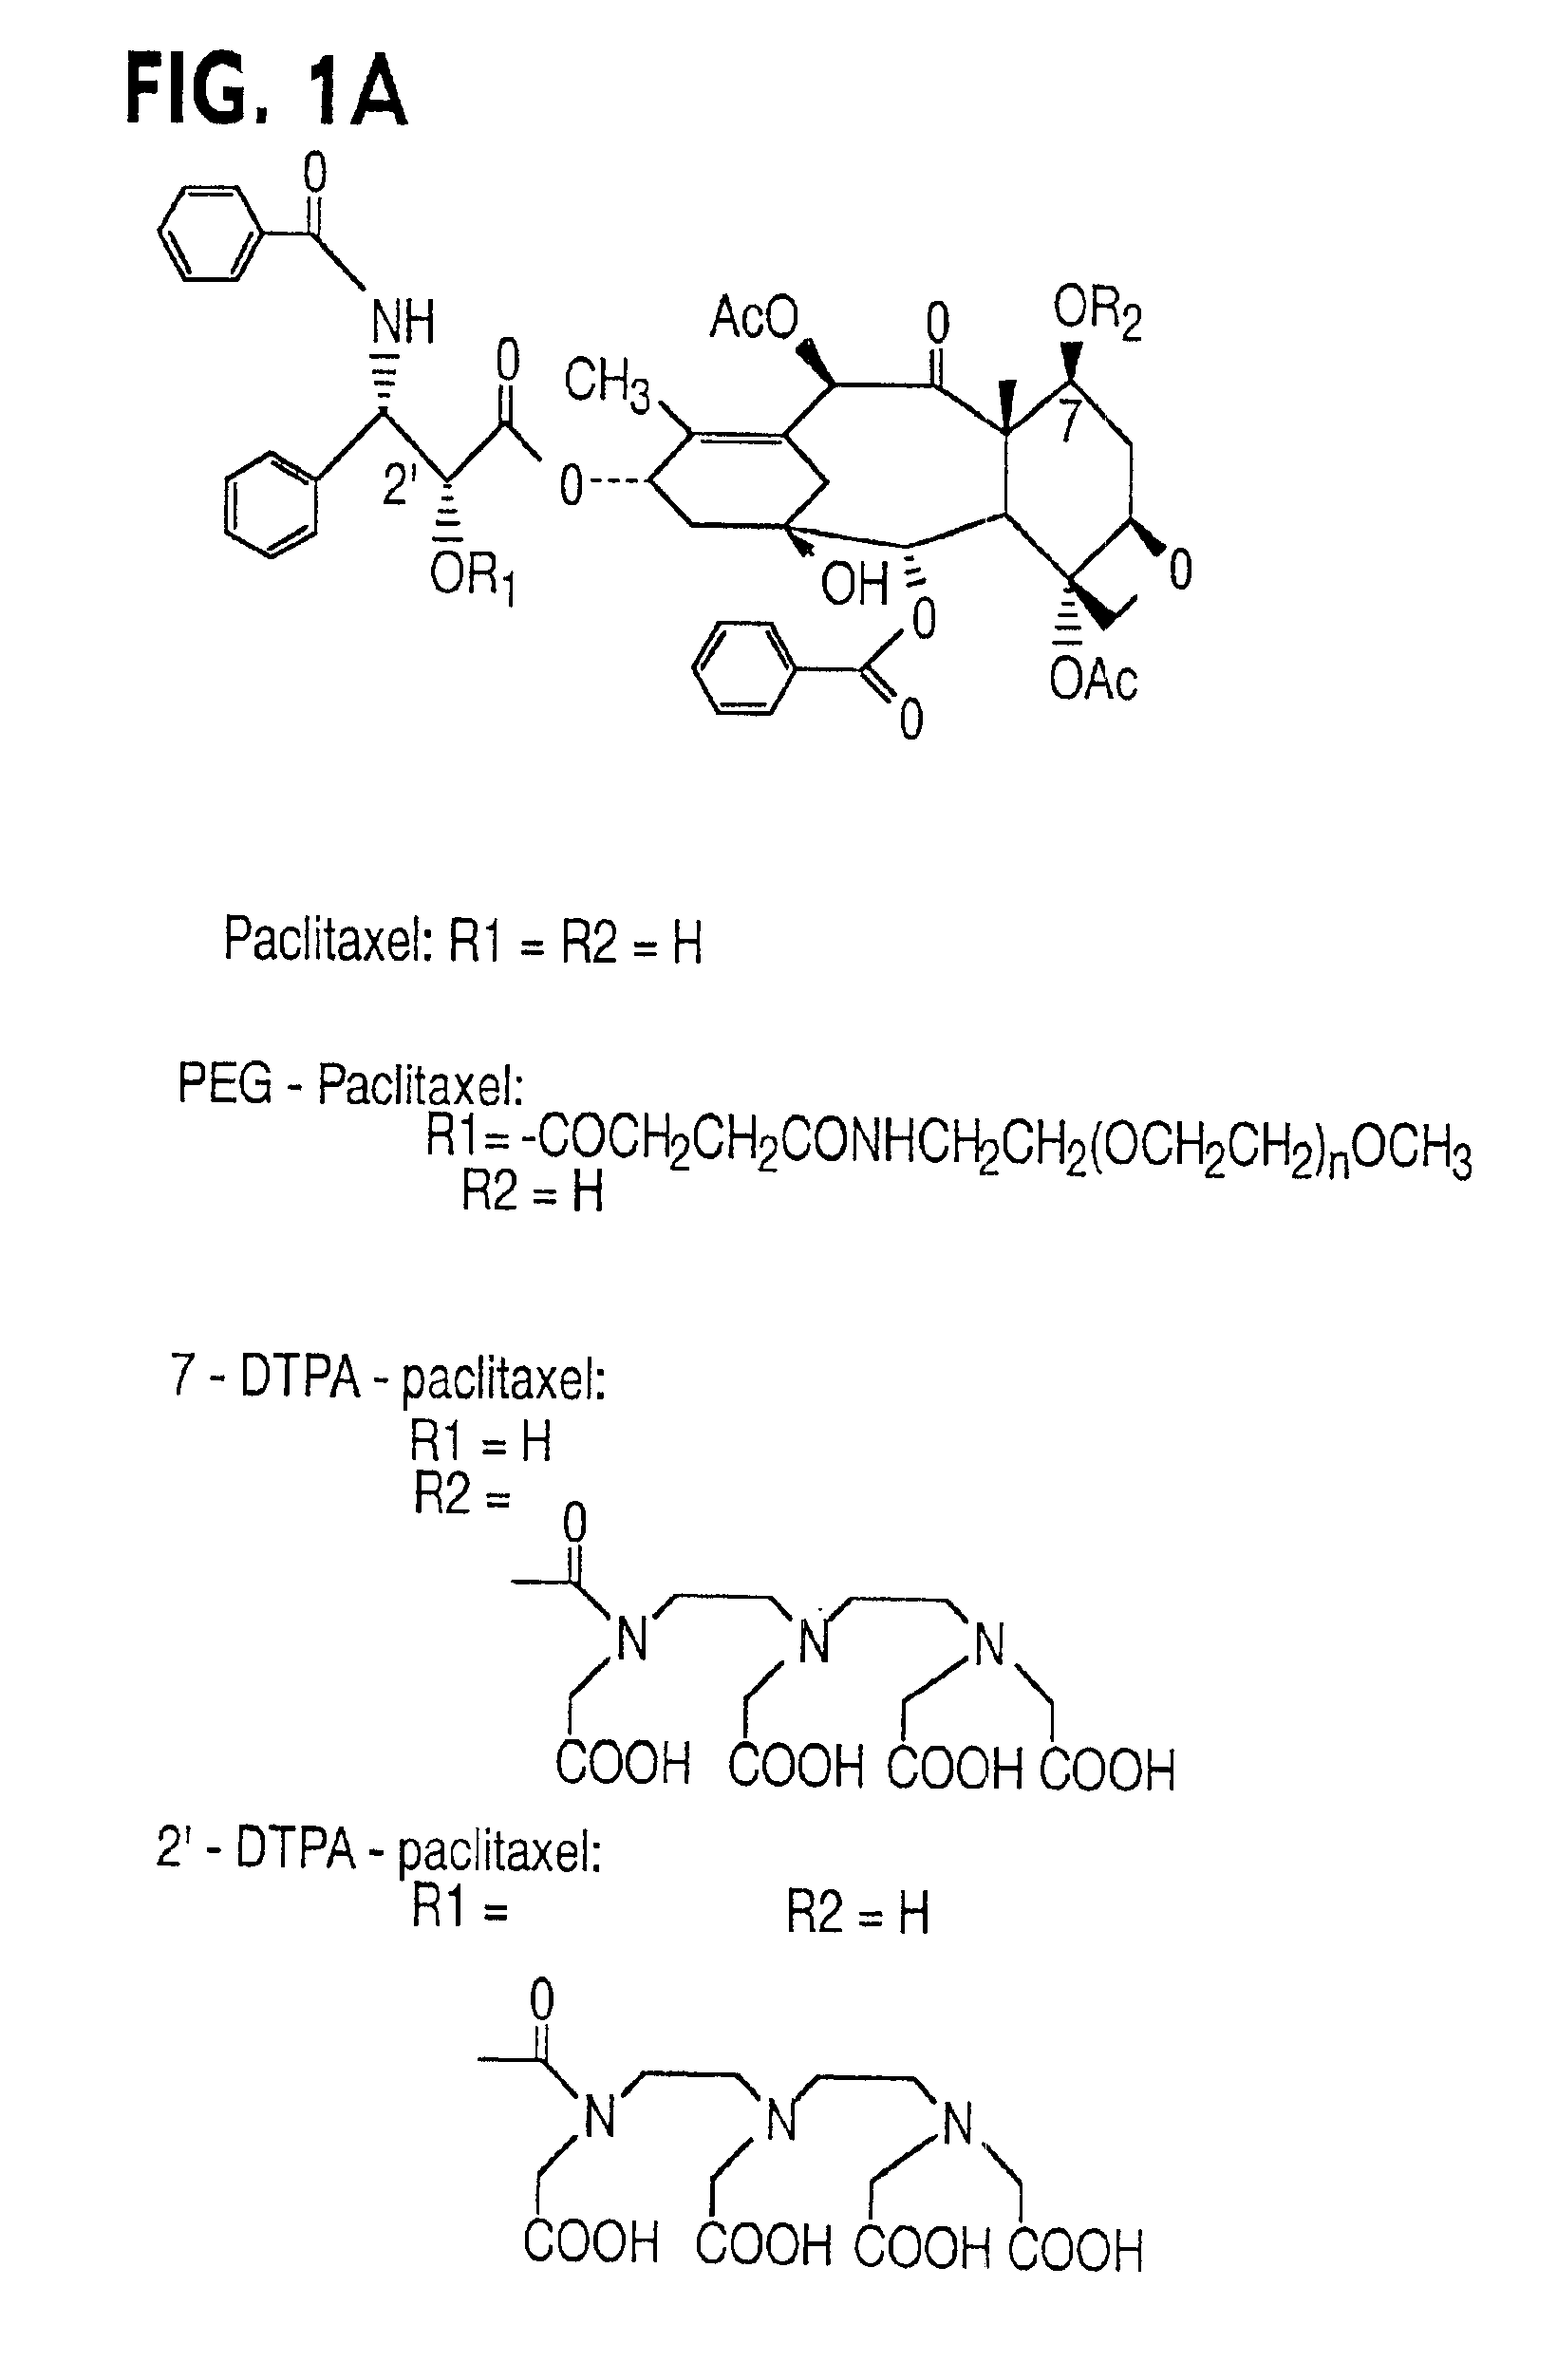 Water soluble paclitaxel derivatives